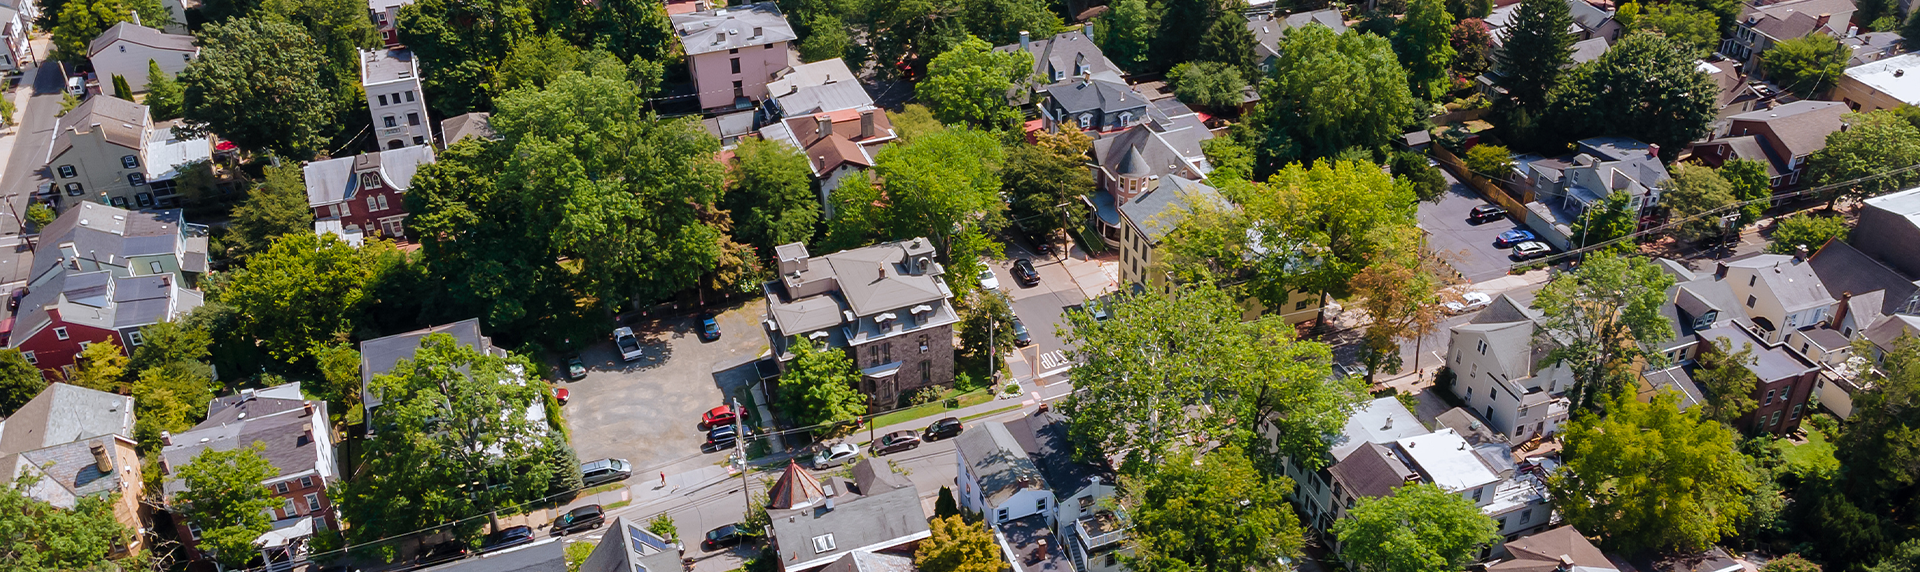 Panoramic view of a neighborhood in roofs of houses of residential area of Lambertville NJ US